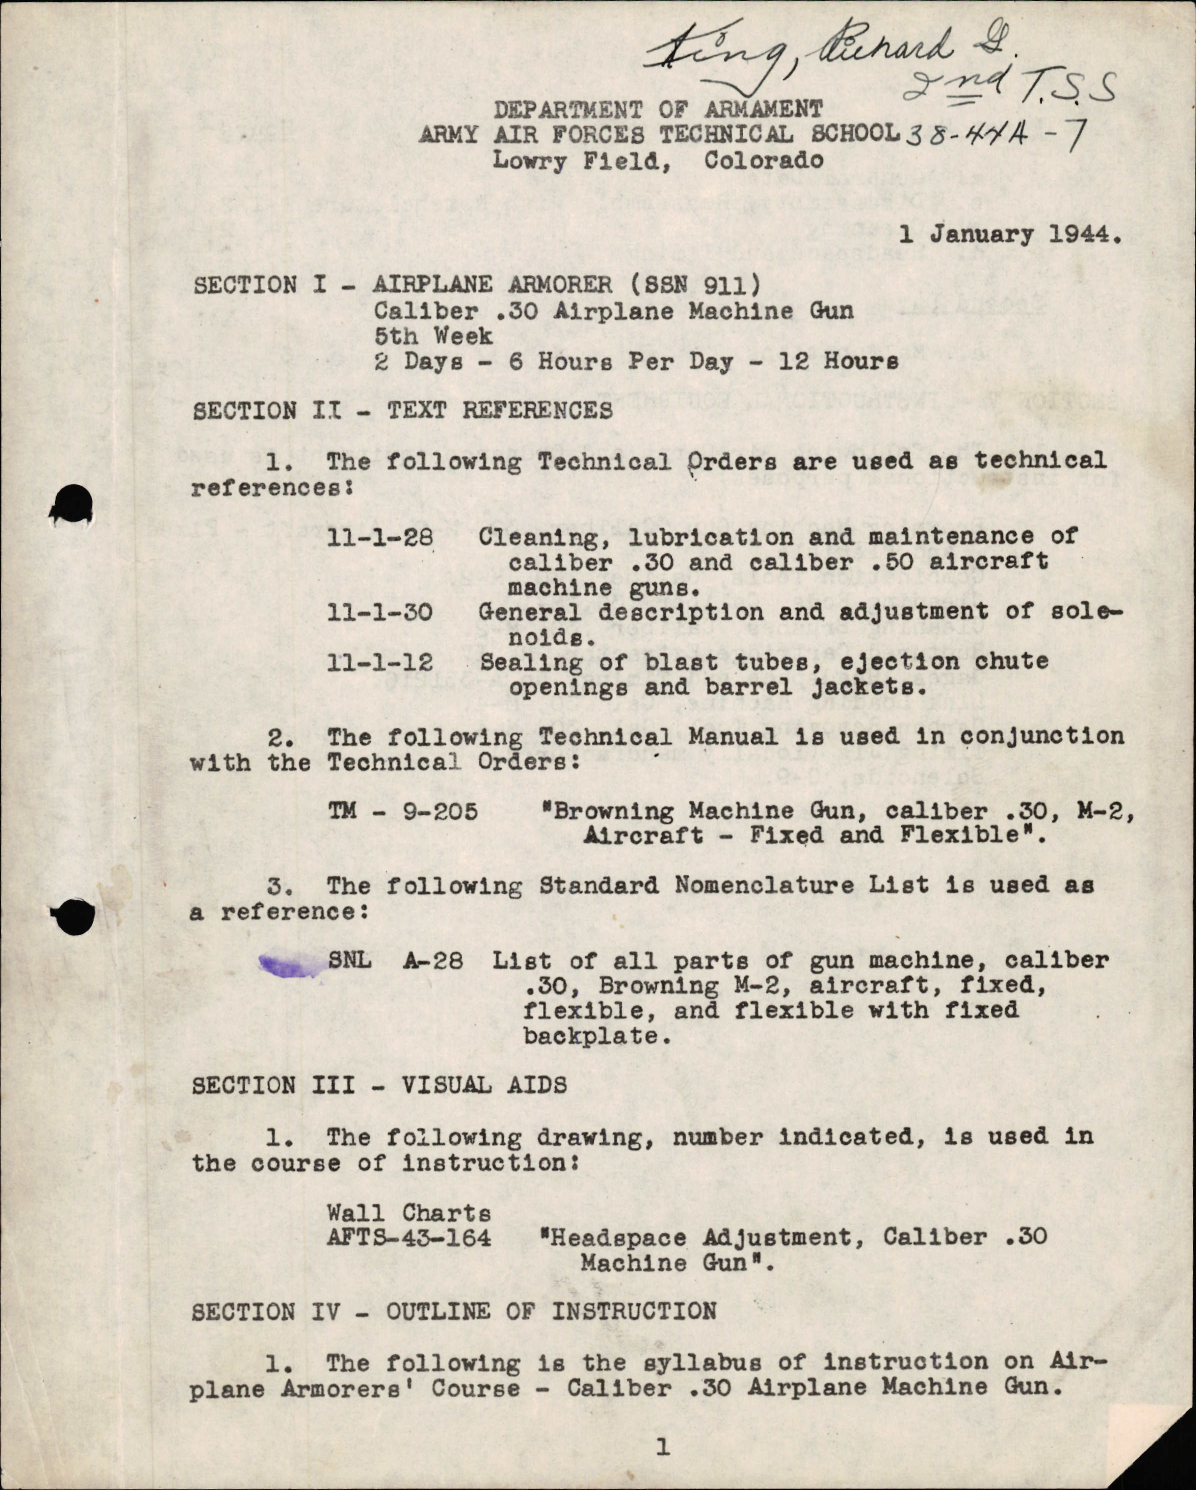 Sample page 1 from AirCorps Library document: Airplane Armorer - Caliber .30 Airplane Machine Gun